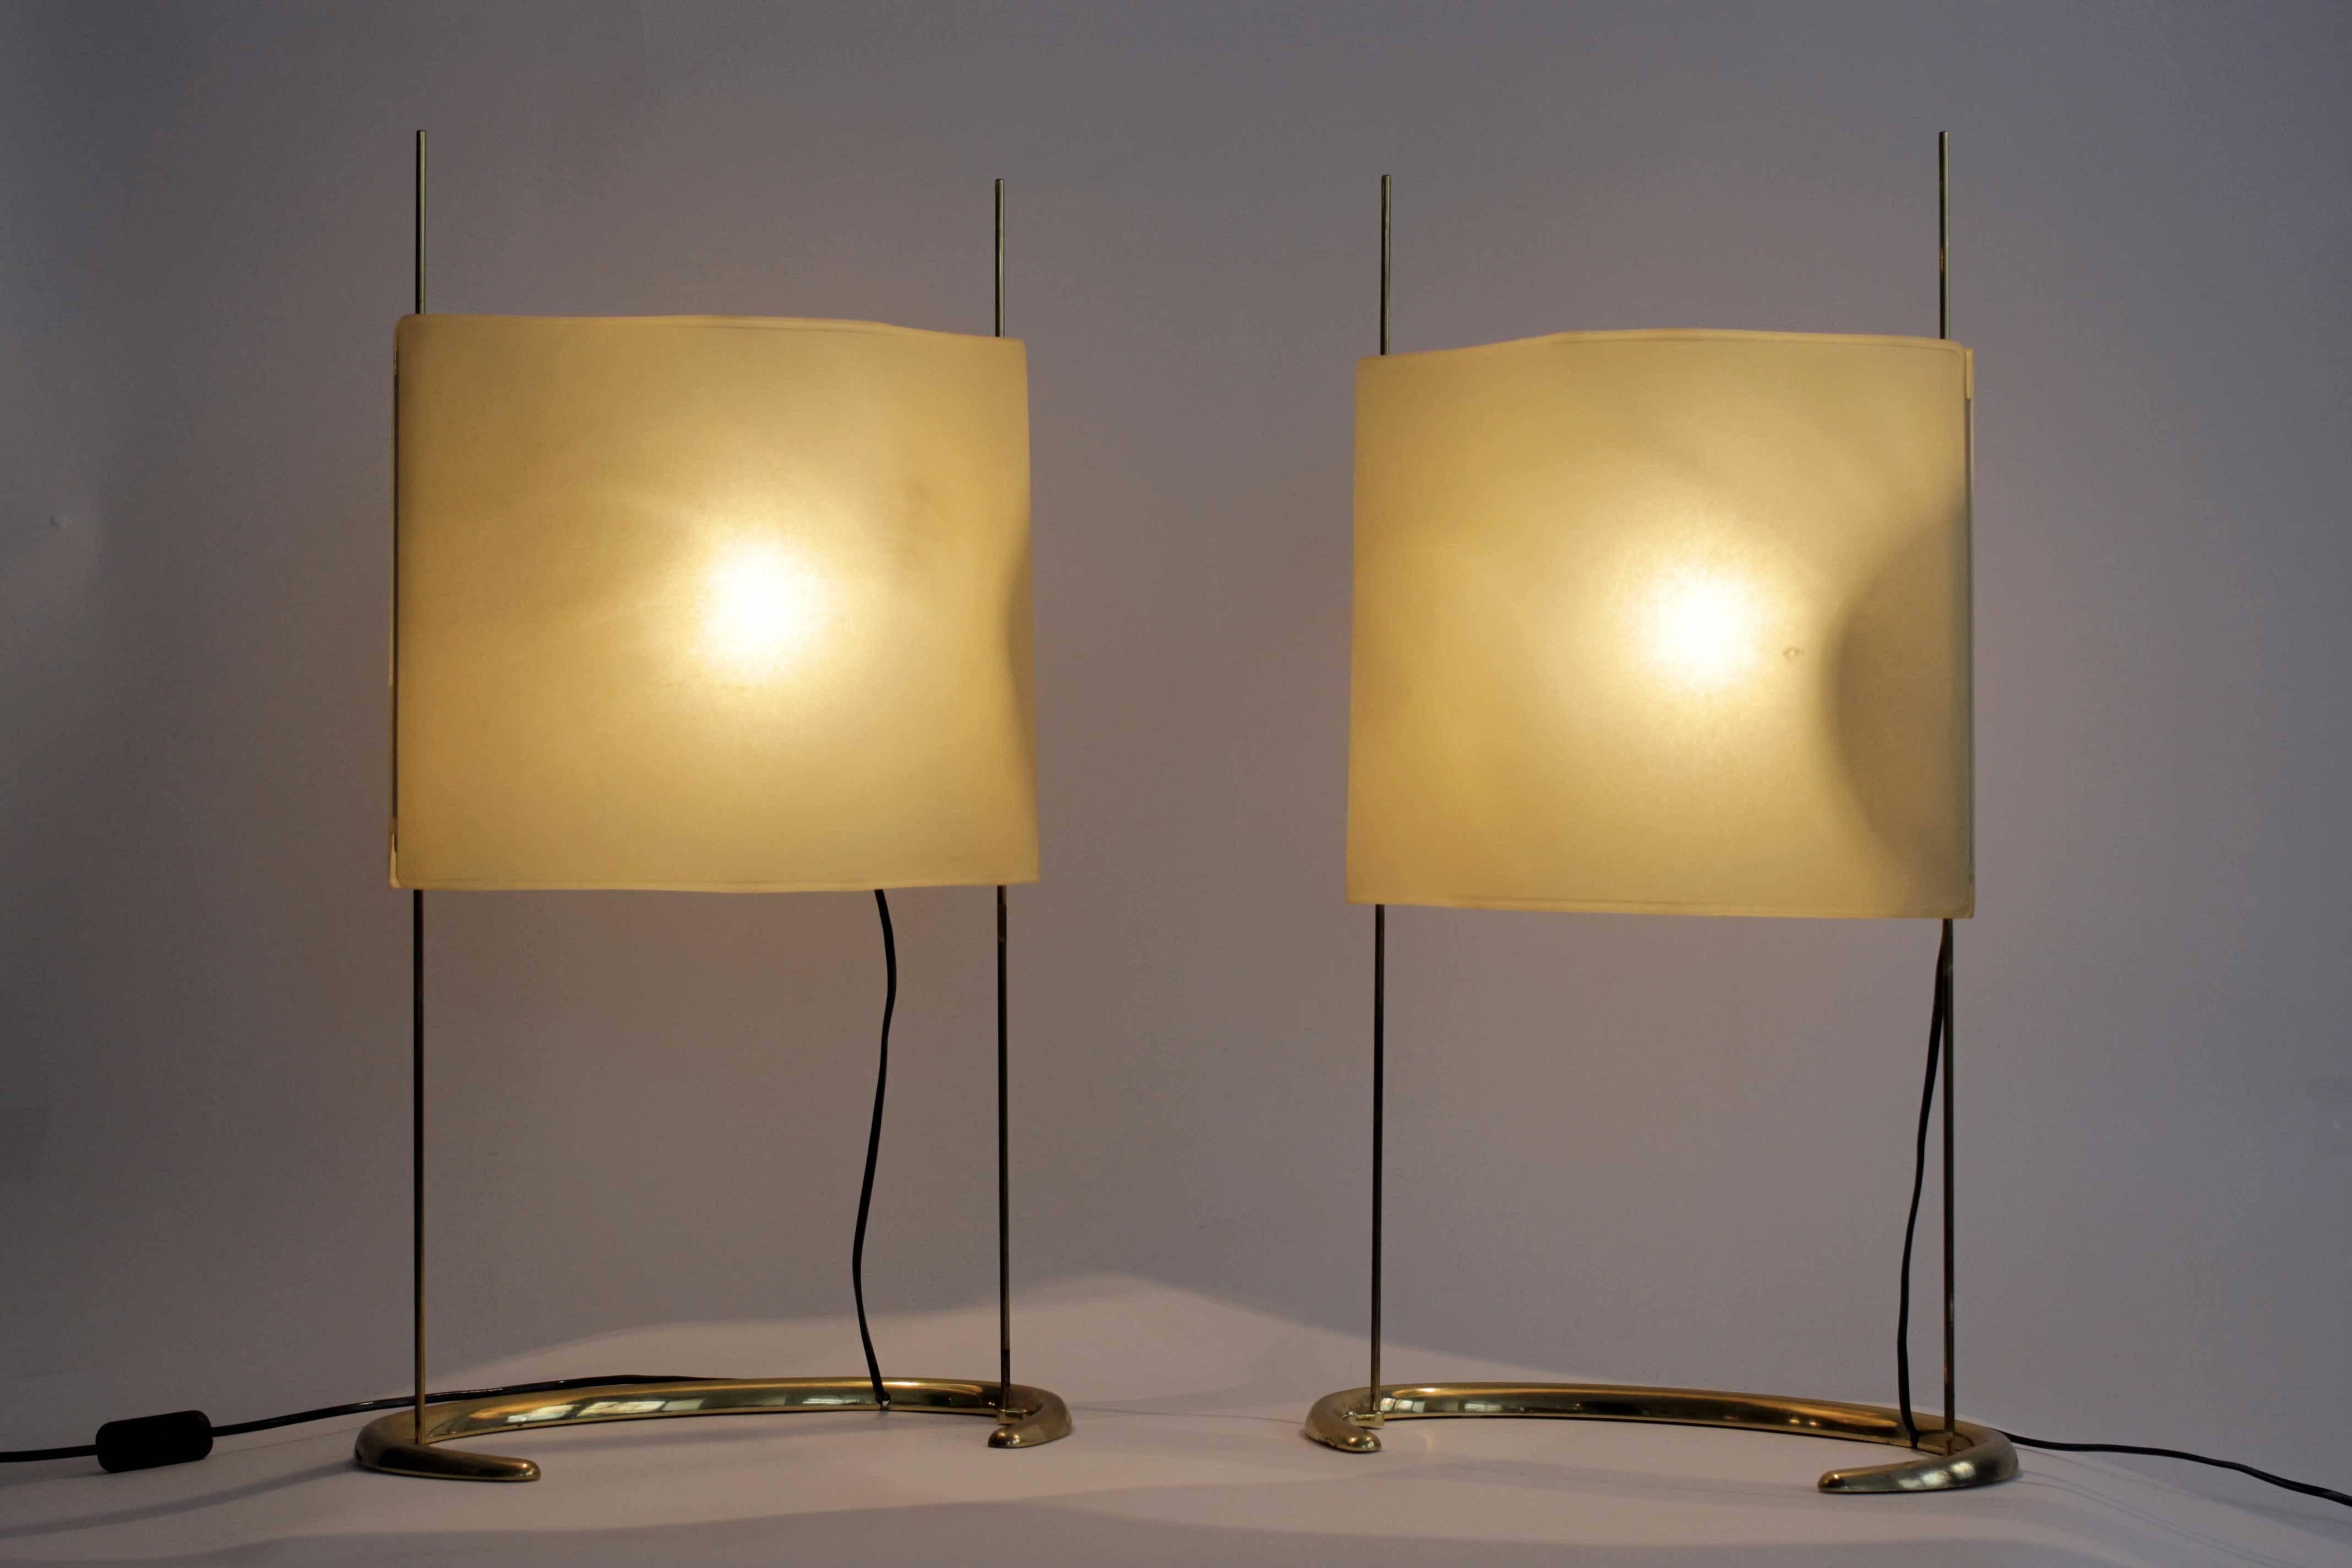 Pair of important table lamps designed by Paolo Rizzato and produced by Arteluce in Italy. Signed under the base.